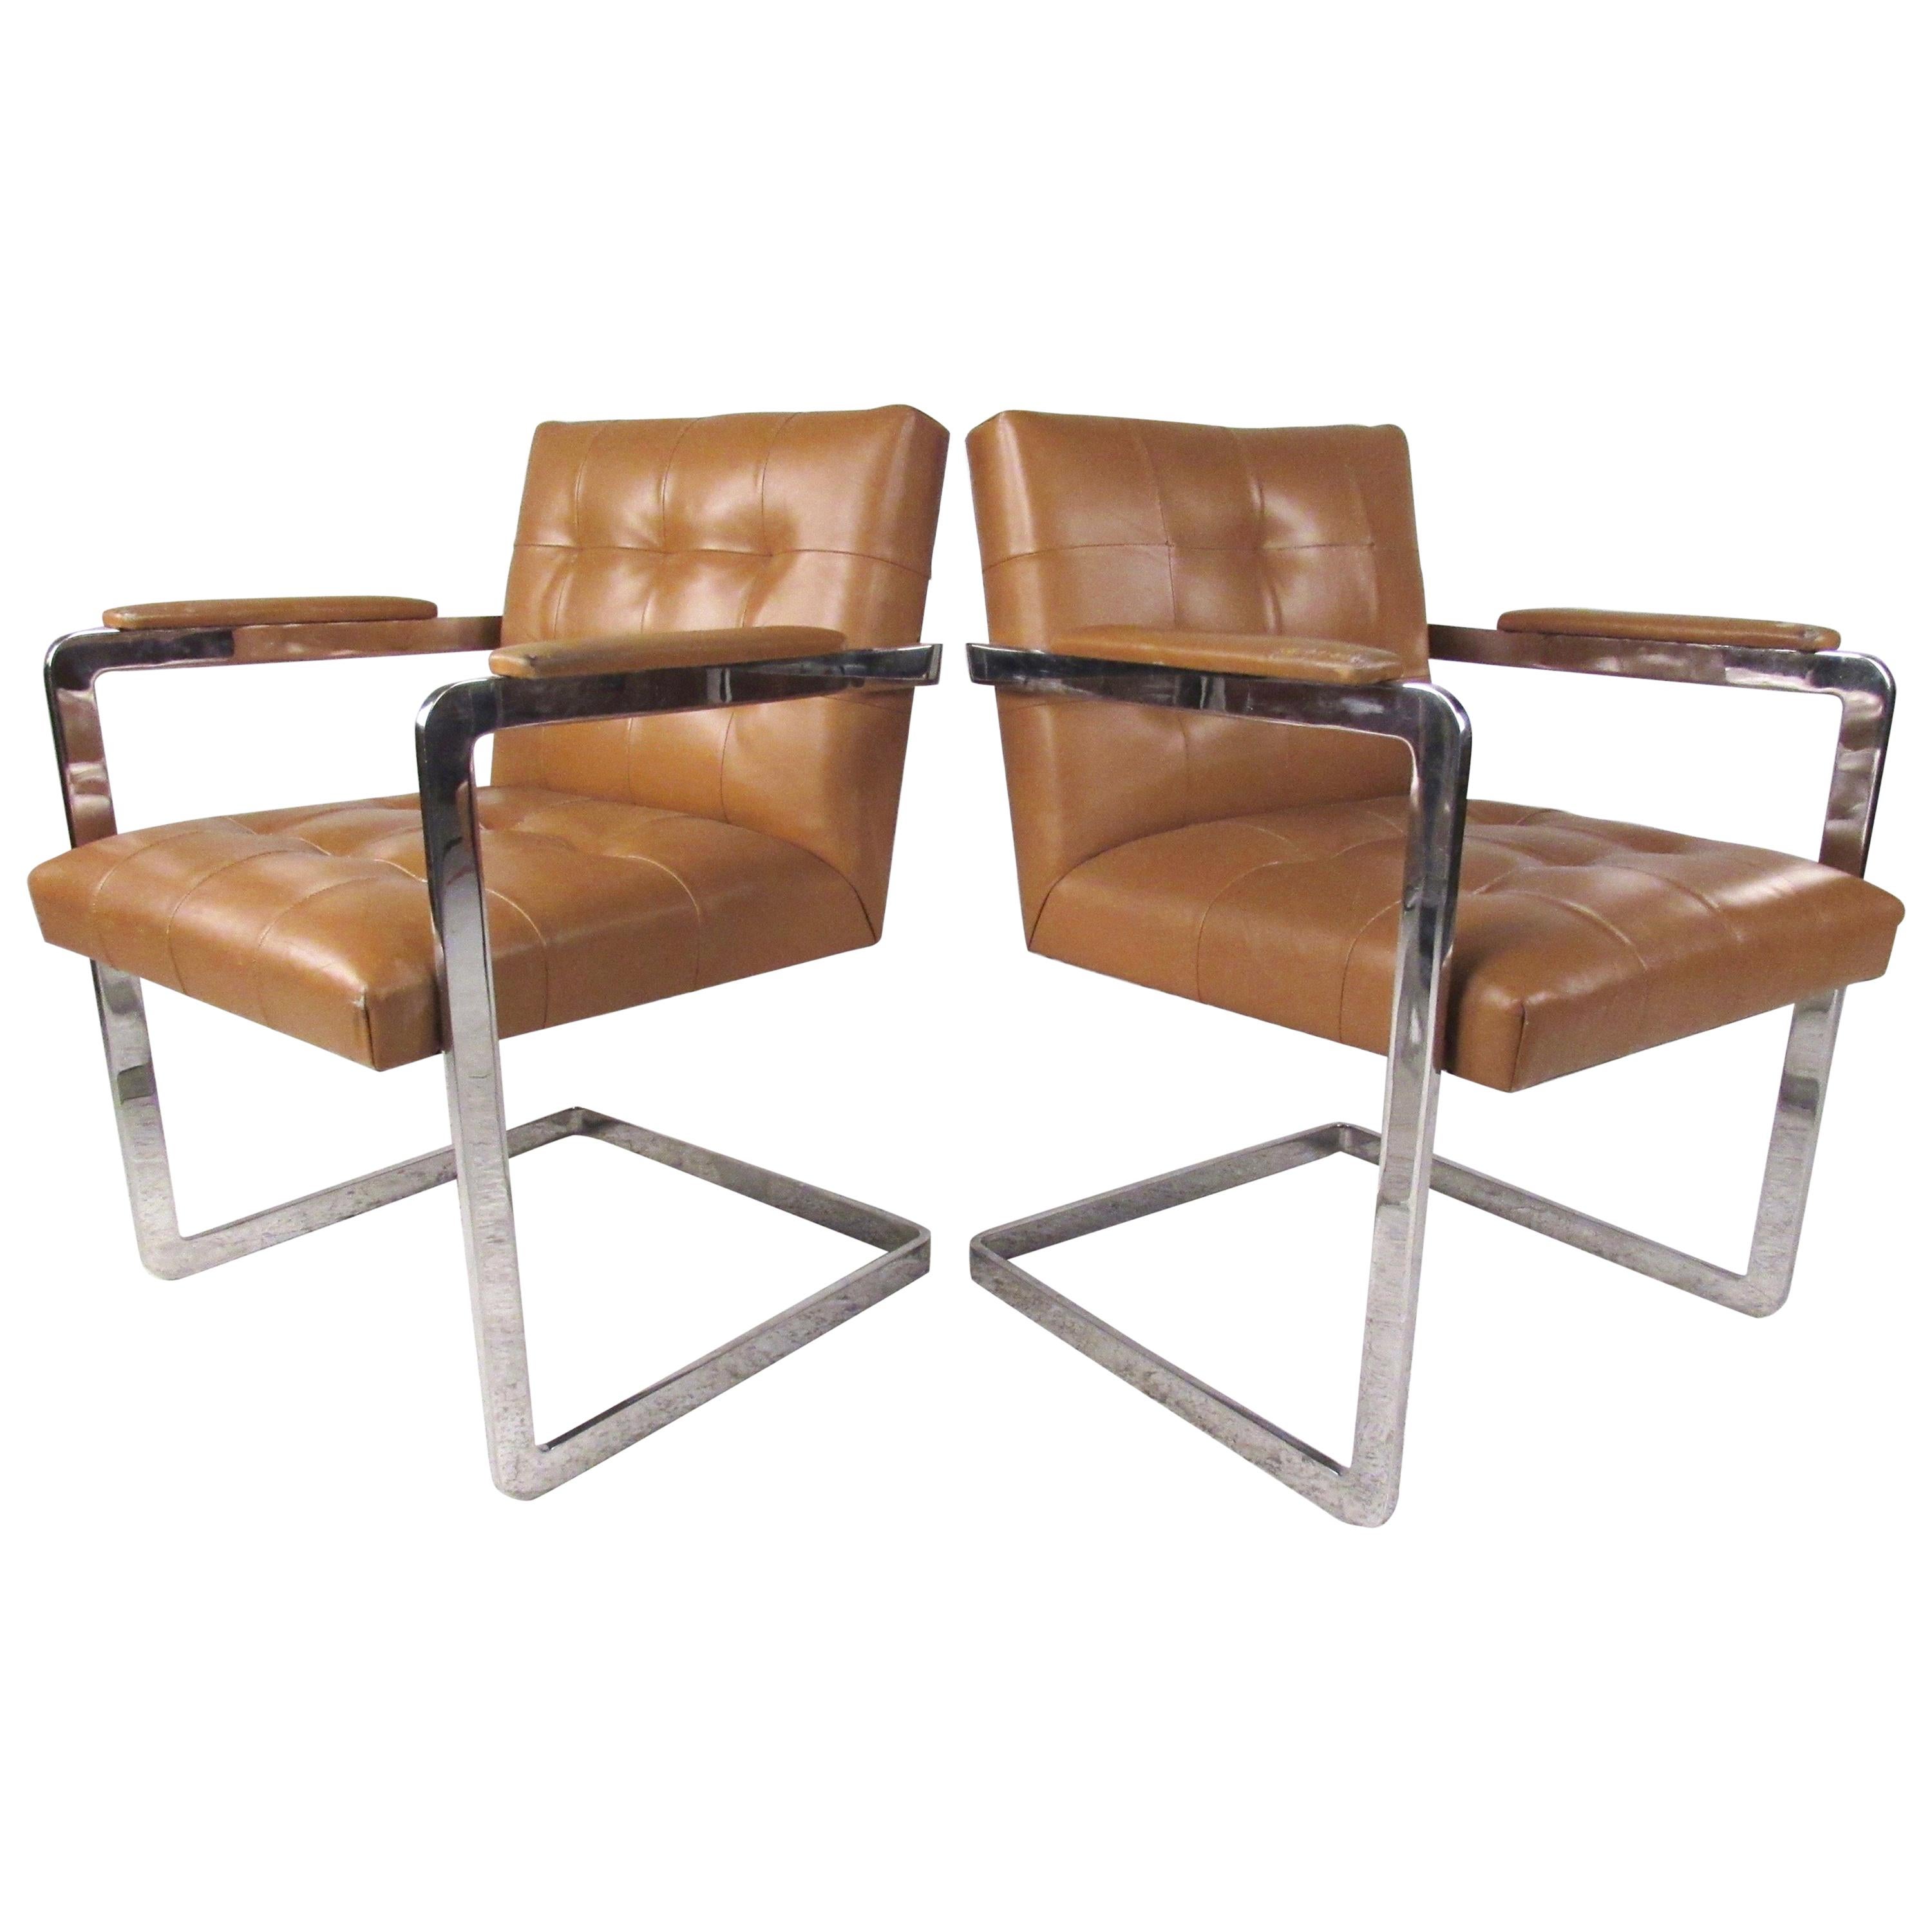 Pair Vintage Leather And Chrome Chairs, Chrome Leather Chair